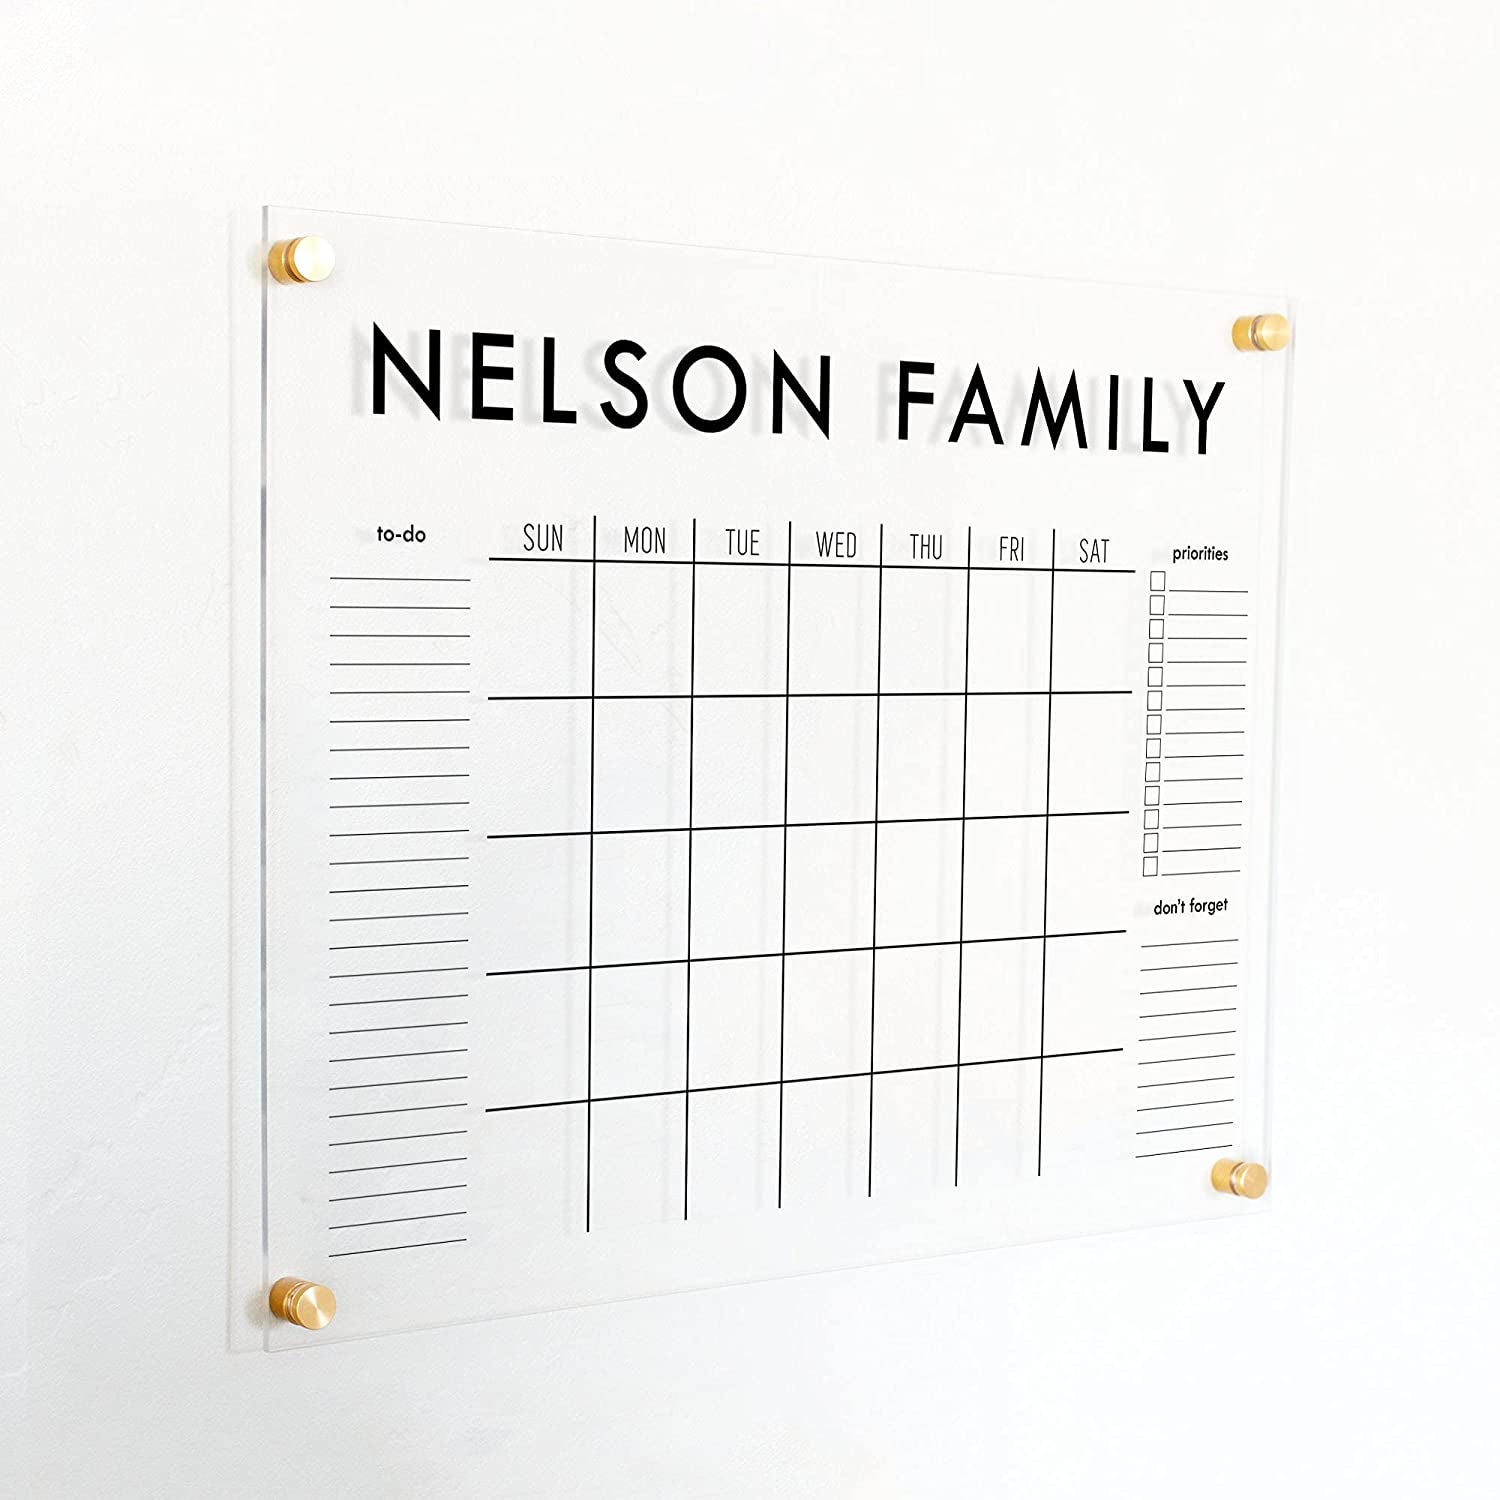 the calendar on the wall reads nelson family on the top